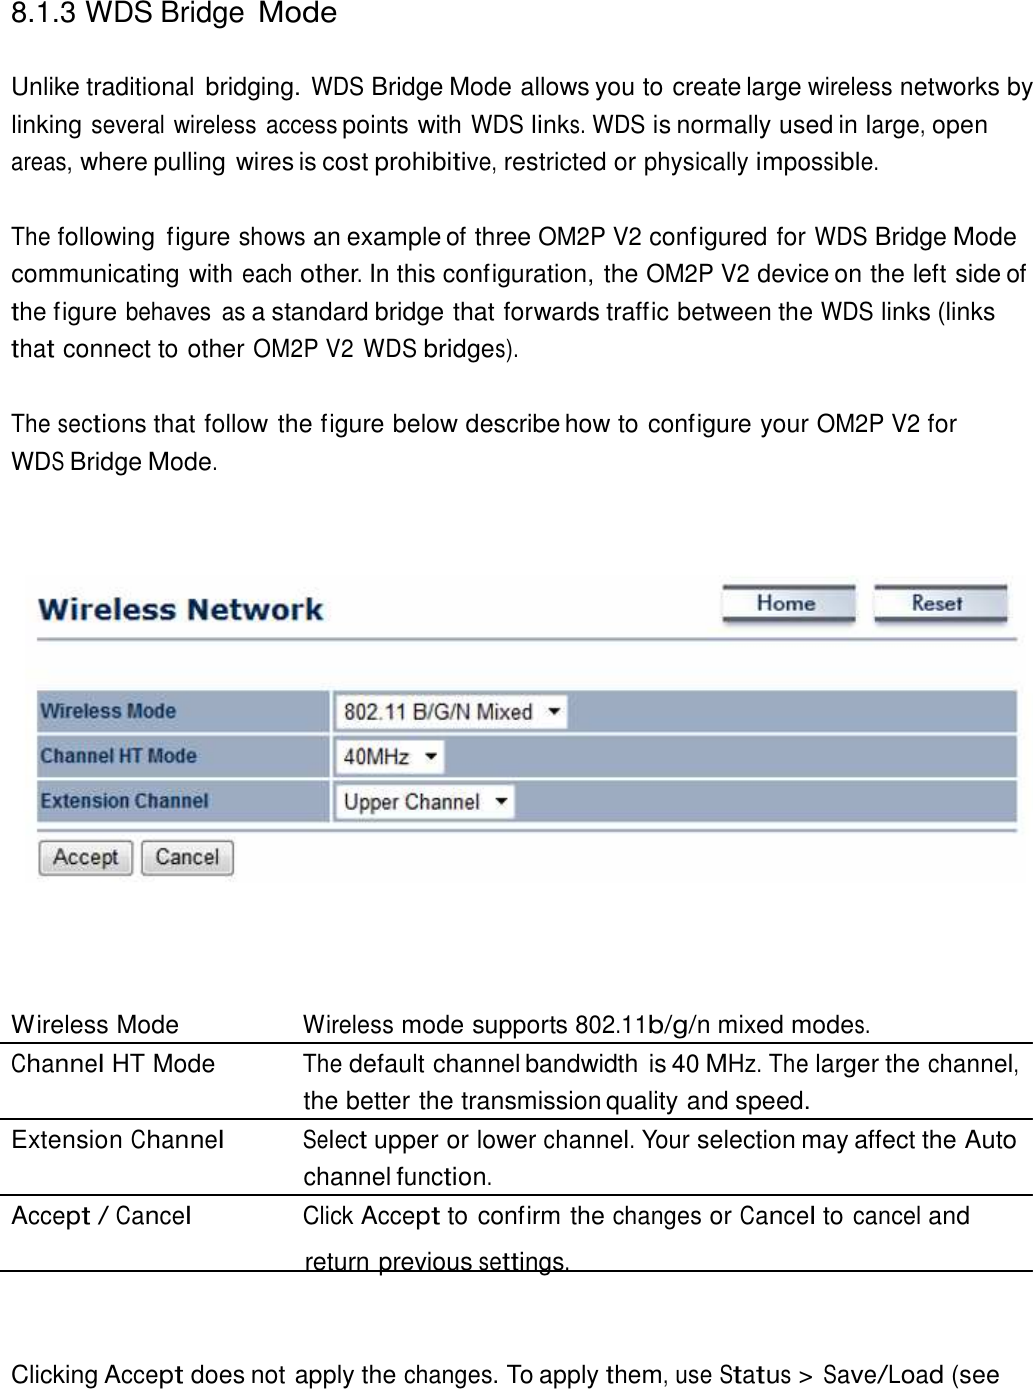  8.1.3 WDS Bridge Mode   Unlike traditional  bridging. WDS Bridge Mode allows you to create large wireless networks by linking several wireless access points with WDS links. WDS is normally used in large, open areas, where pulling wires is cost prohibitive, restricted or physically impossible.   The following  figure shows an example of three OM2P V2 configured for WDS Bridge Mode communicating with each other. In this configuration, the OM2P V2 device on the left side of the figure behaves  as a standard bridge that forwards traffic between the WDS links (links that connect to other OM2P V2 WDS bridges).  The sections that follow the figure below describe how to configure your OM2P V2 for WDS Bridge Mode.                           Wireless Mode  Wireless mode supports 802.11b/g/n mixed modes. Channel HT Mode  The default channel bandwidth is 40 MHz. The larger the channel, the better the transmission quality and speed. Extension Channel Select upper or lower channel. Your selection may affect the Auto channel function. Accept / Cancel Click Accept to confirm the changes or Cancel to cancel and return previous settings.     Clicking Accept does not apply the changes. To apply them, use Status &gt; Save/Load (see 